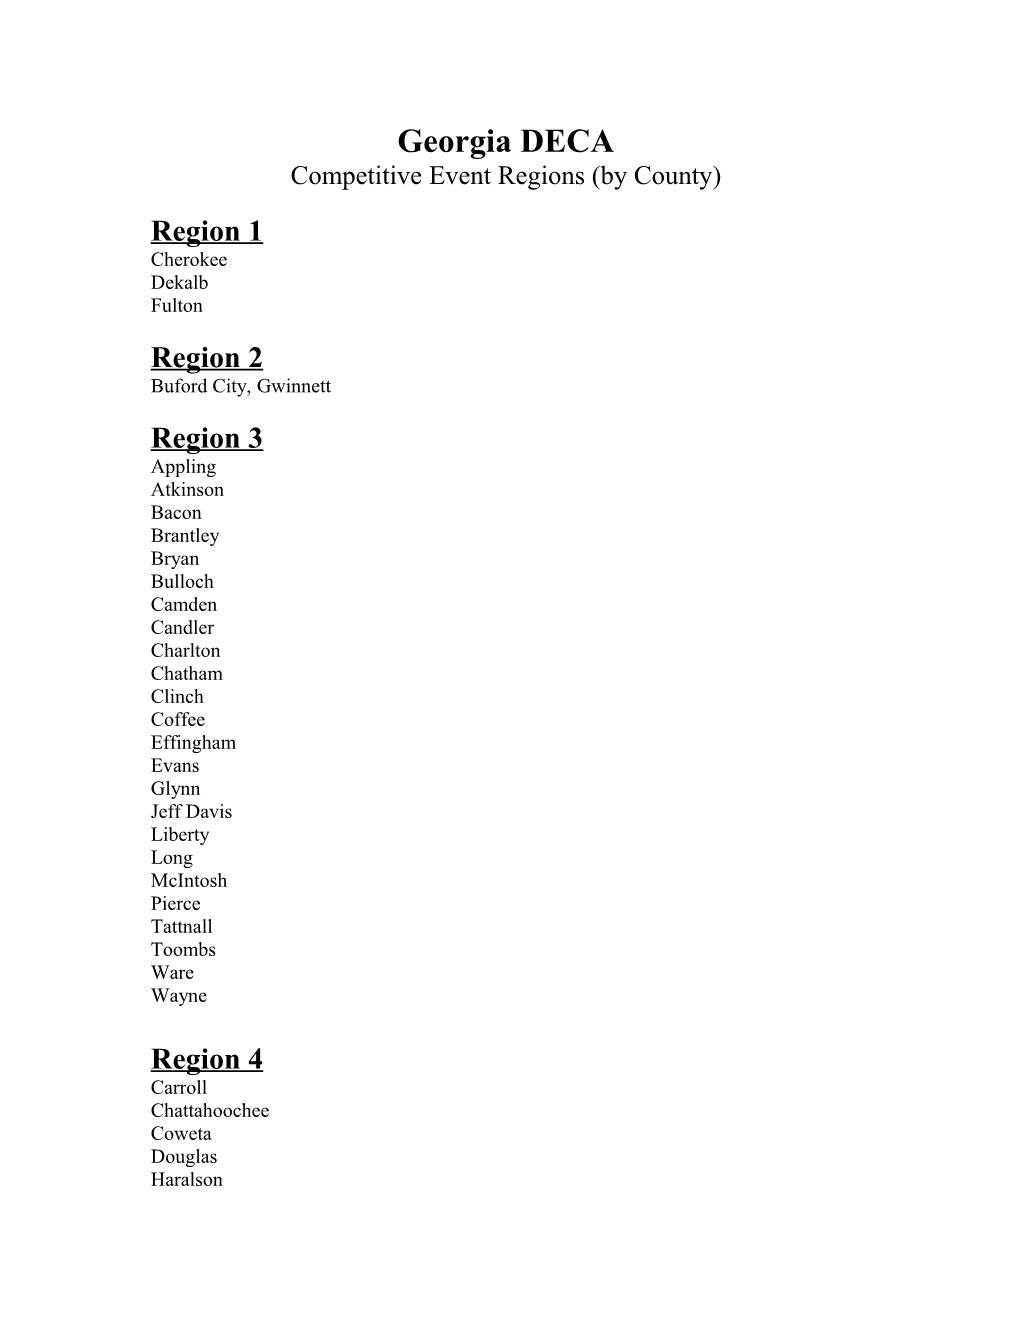 Competitive Event Regions (By County)